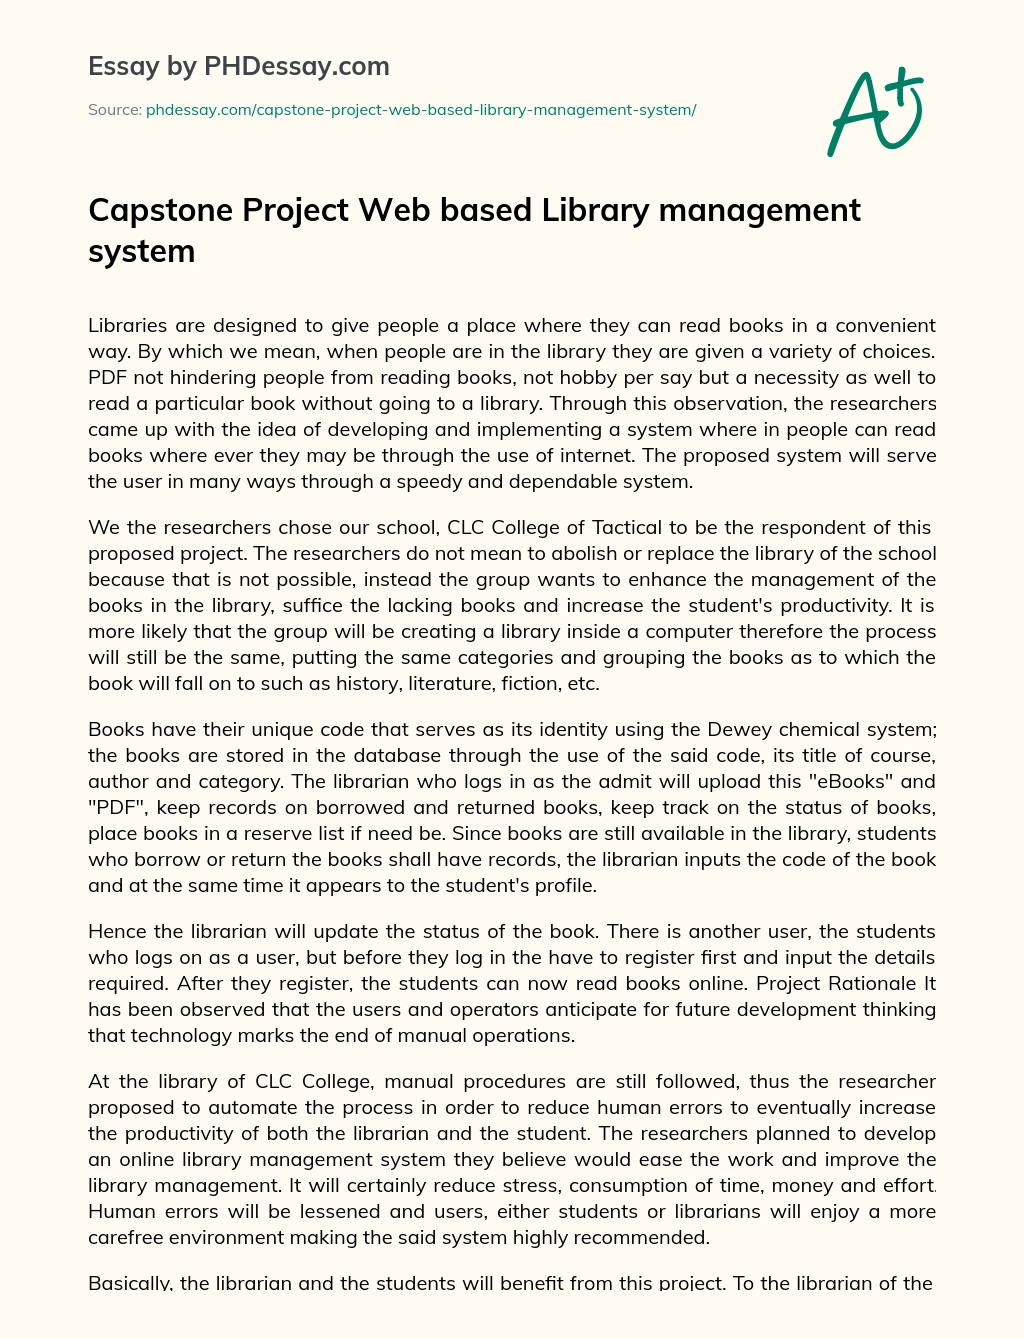 Capstone Project Web based Library management system essay